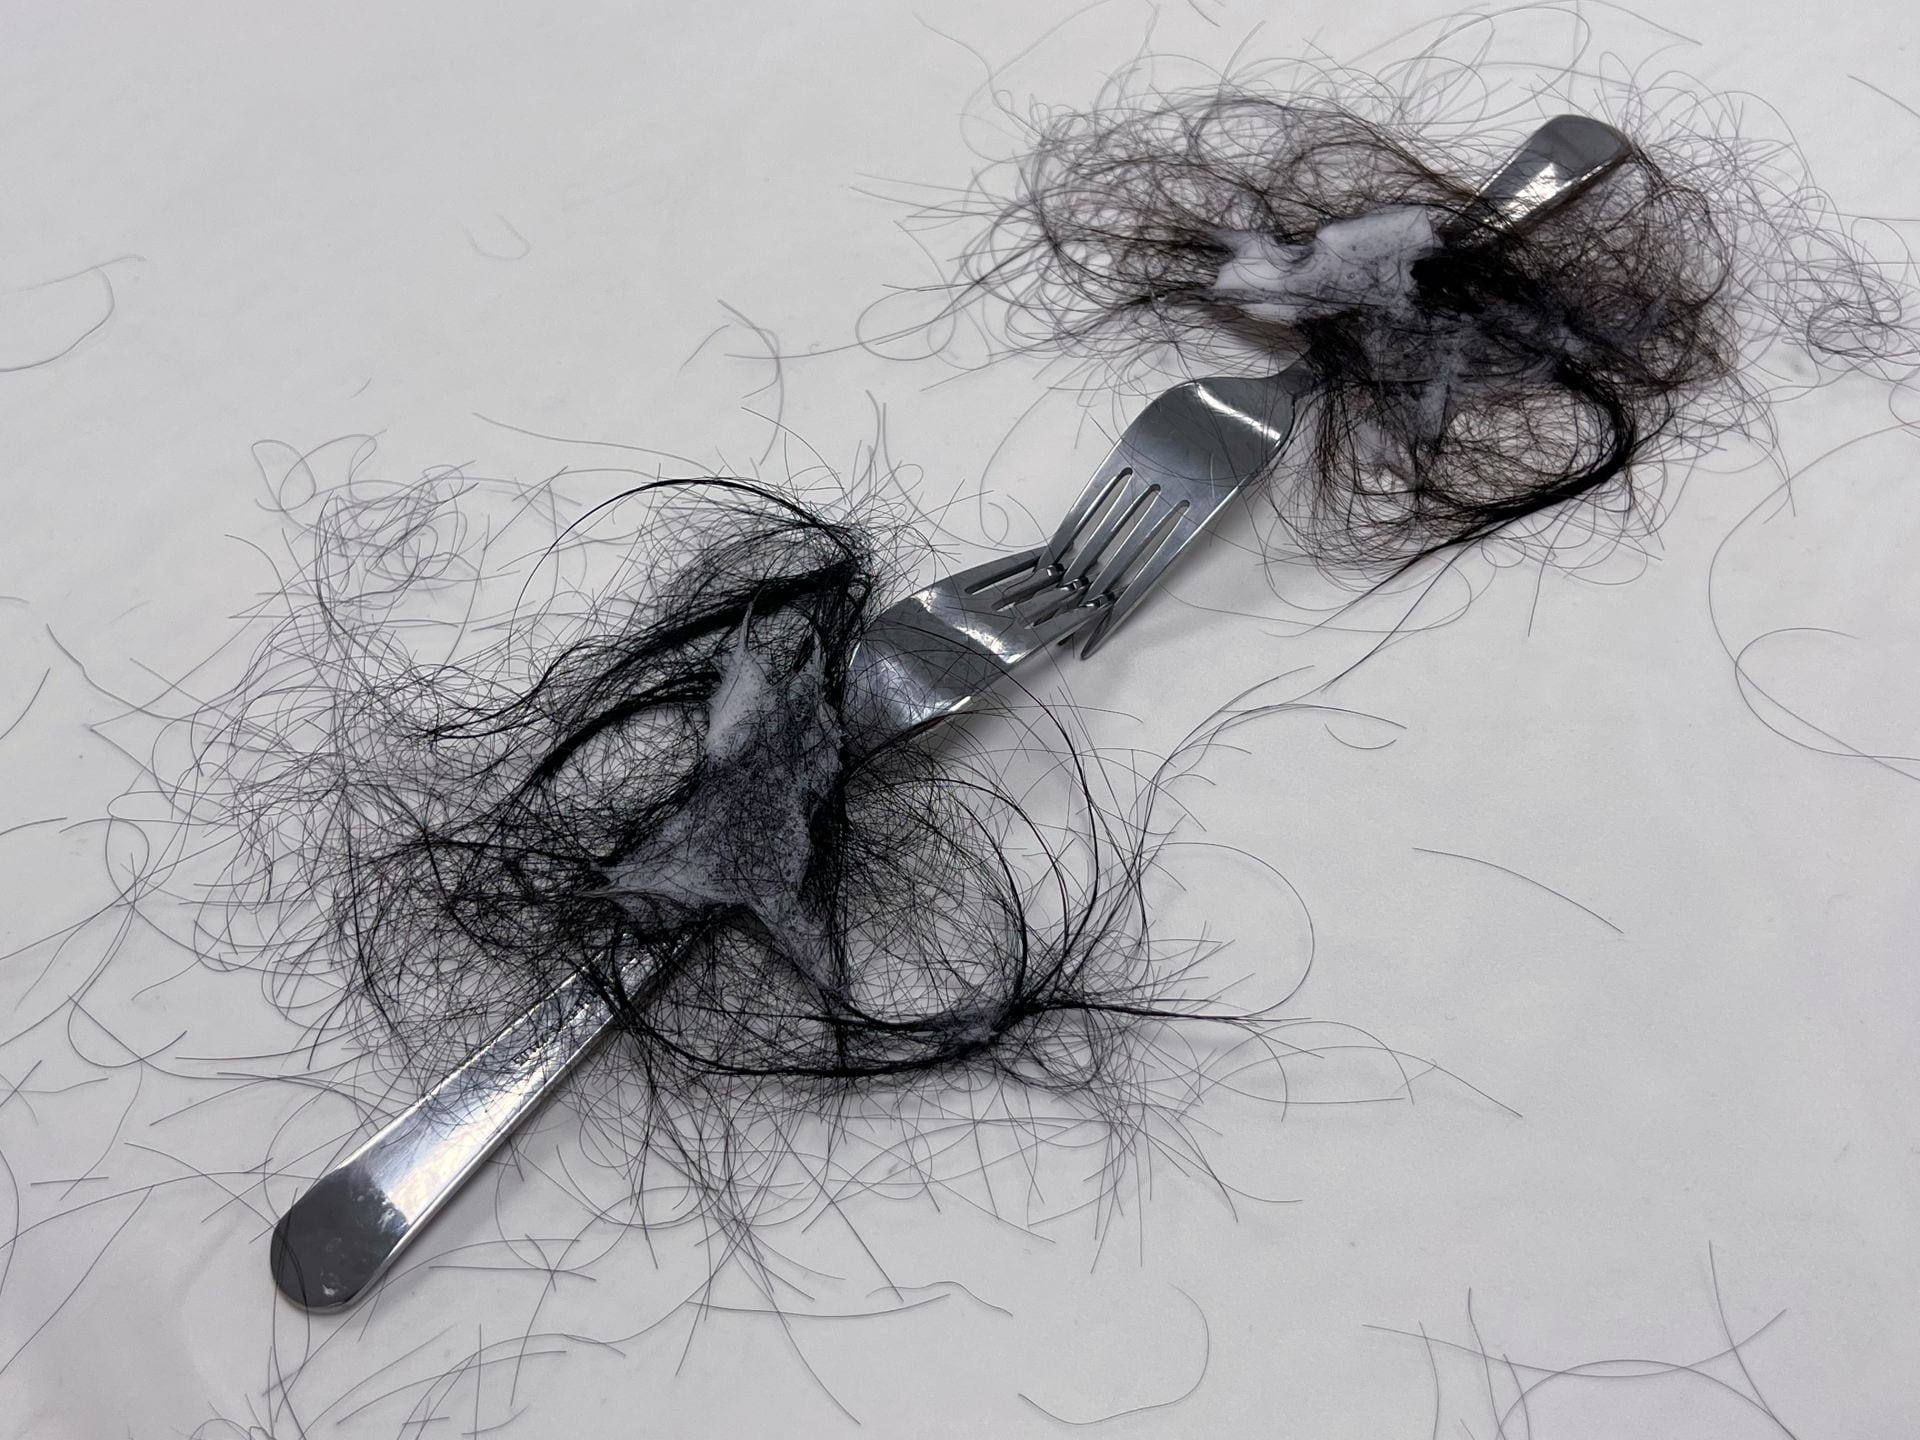 An image of forks facing each other on a table, covered in black hair.